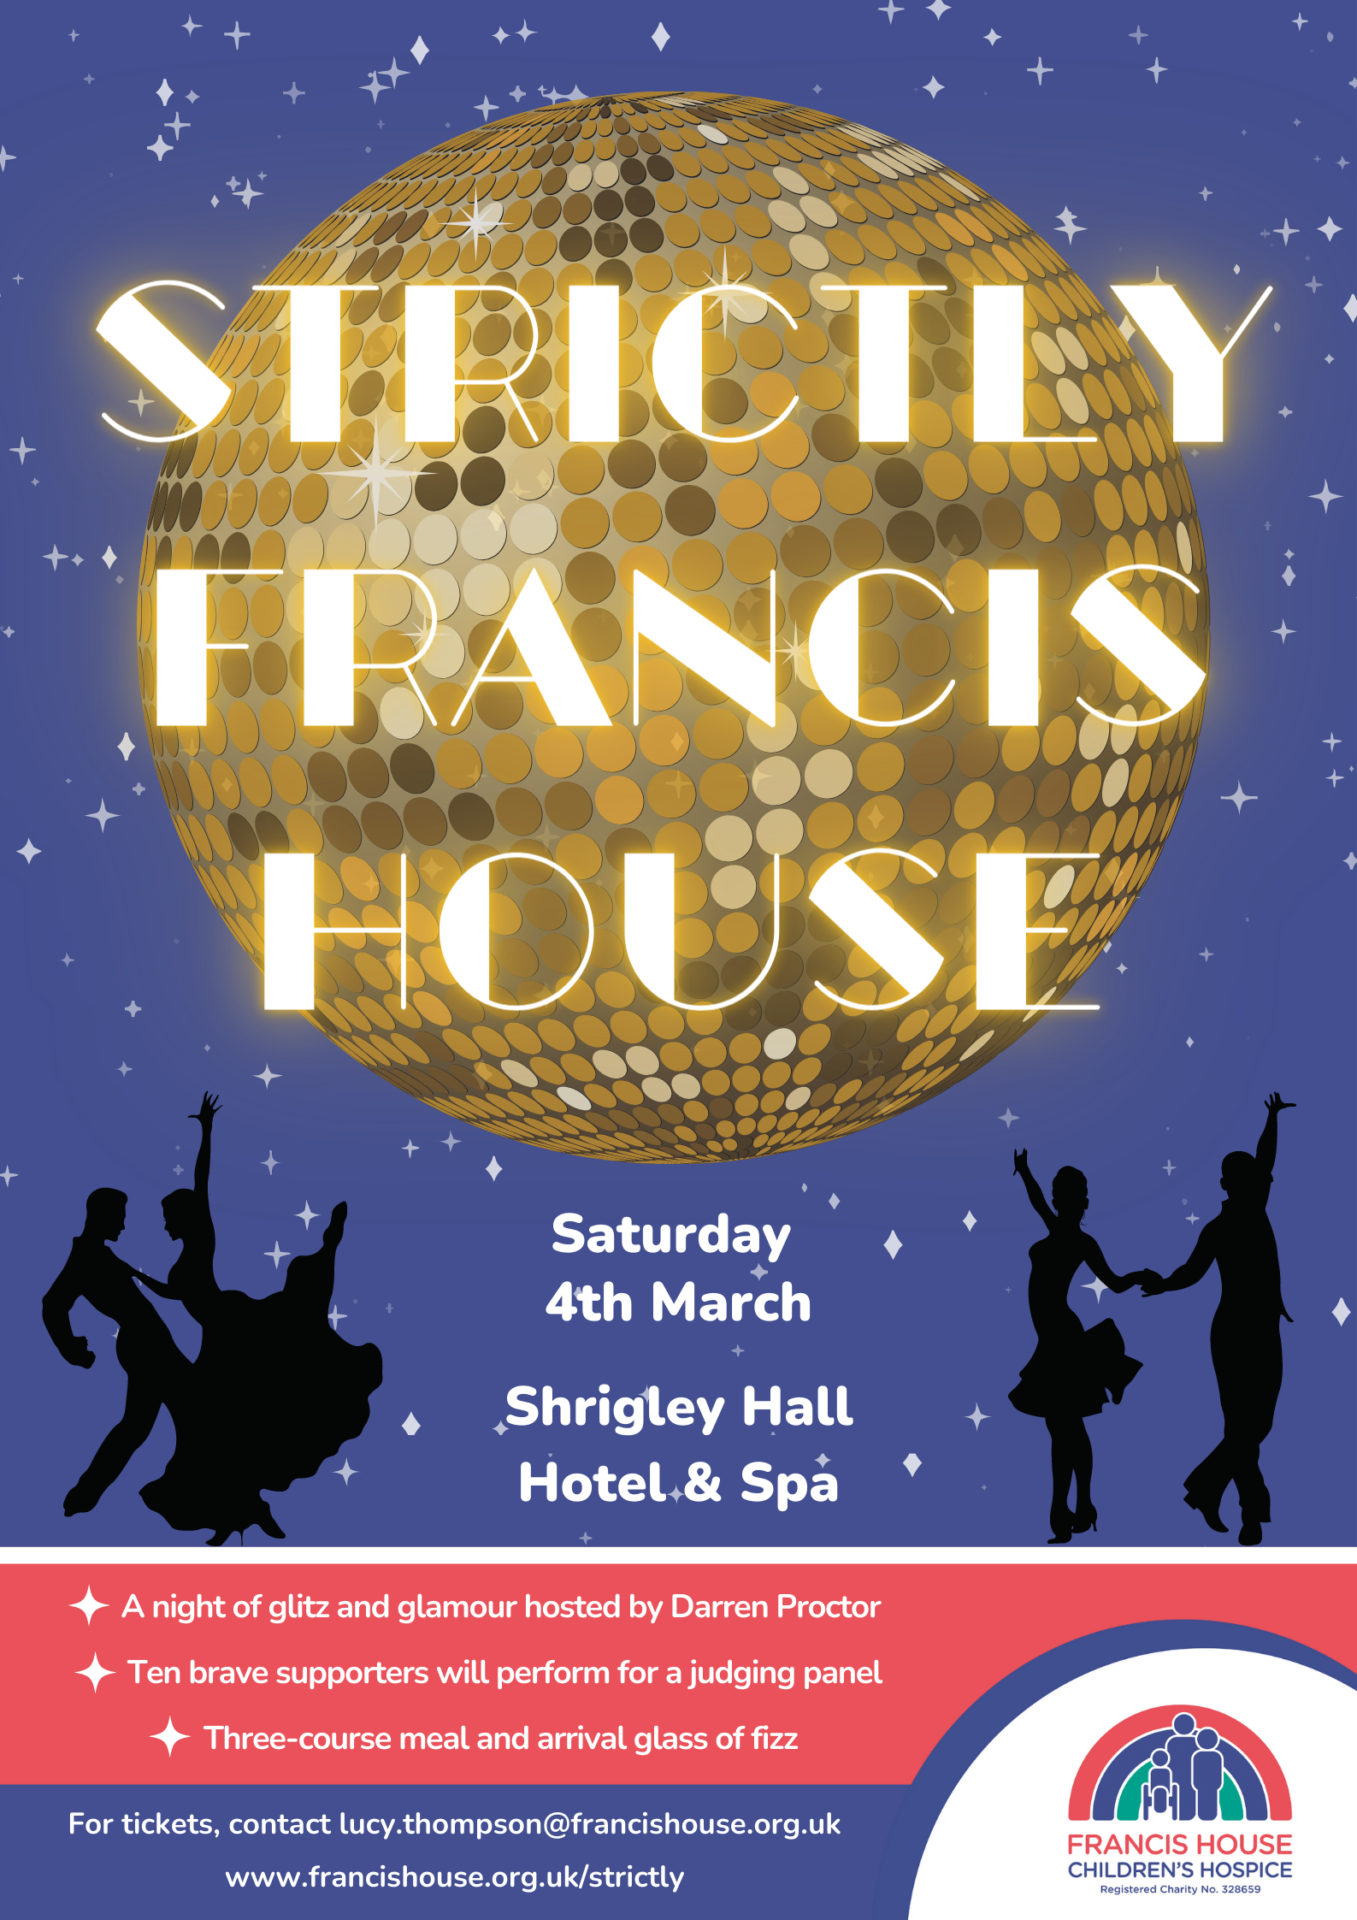 Strictly Francis House